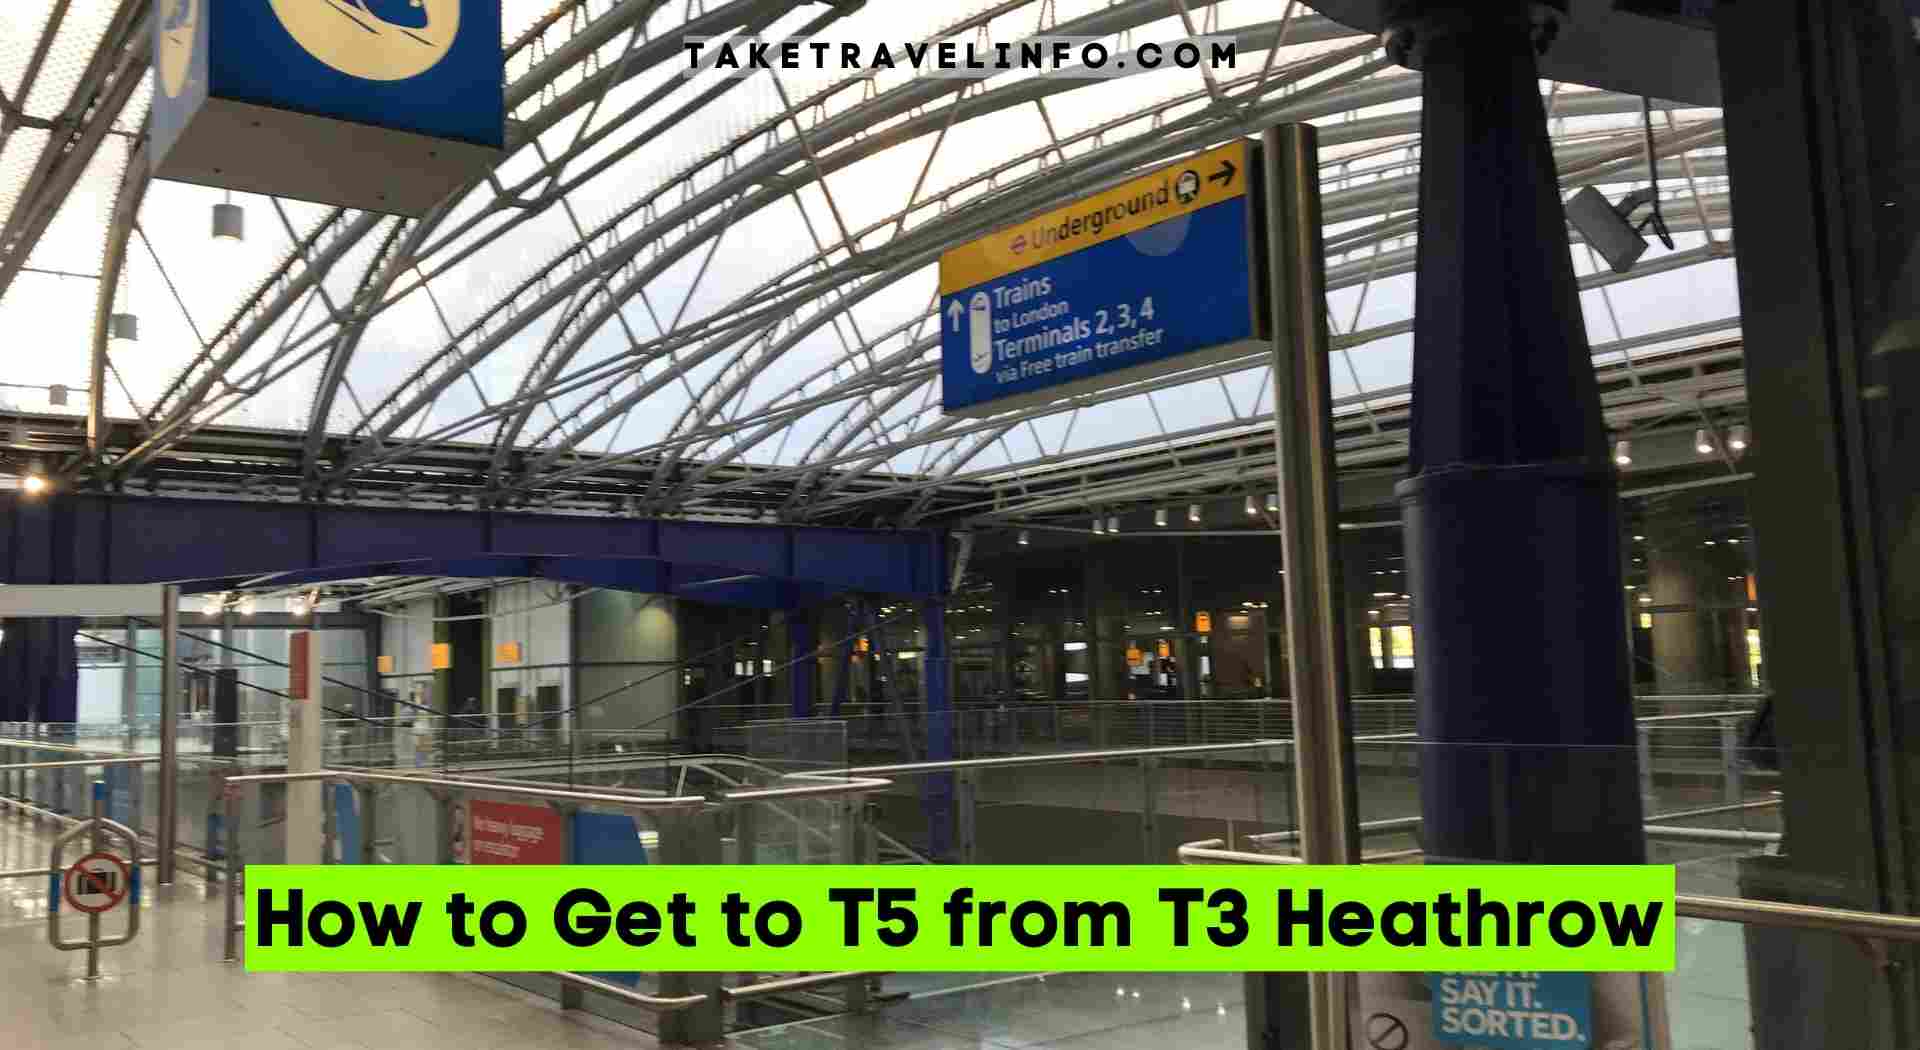 How to Get to T5 from T3 Heathrow